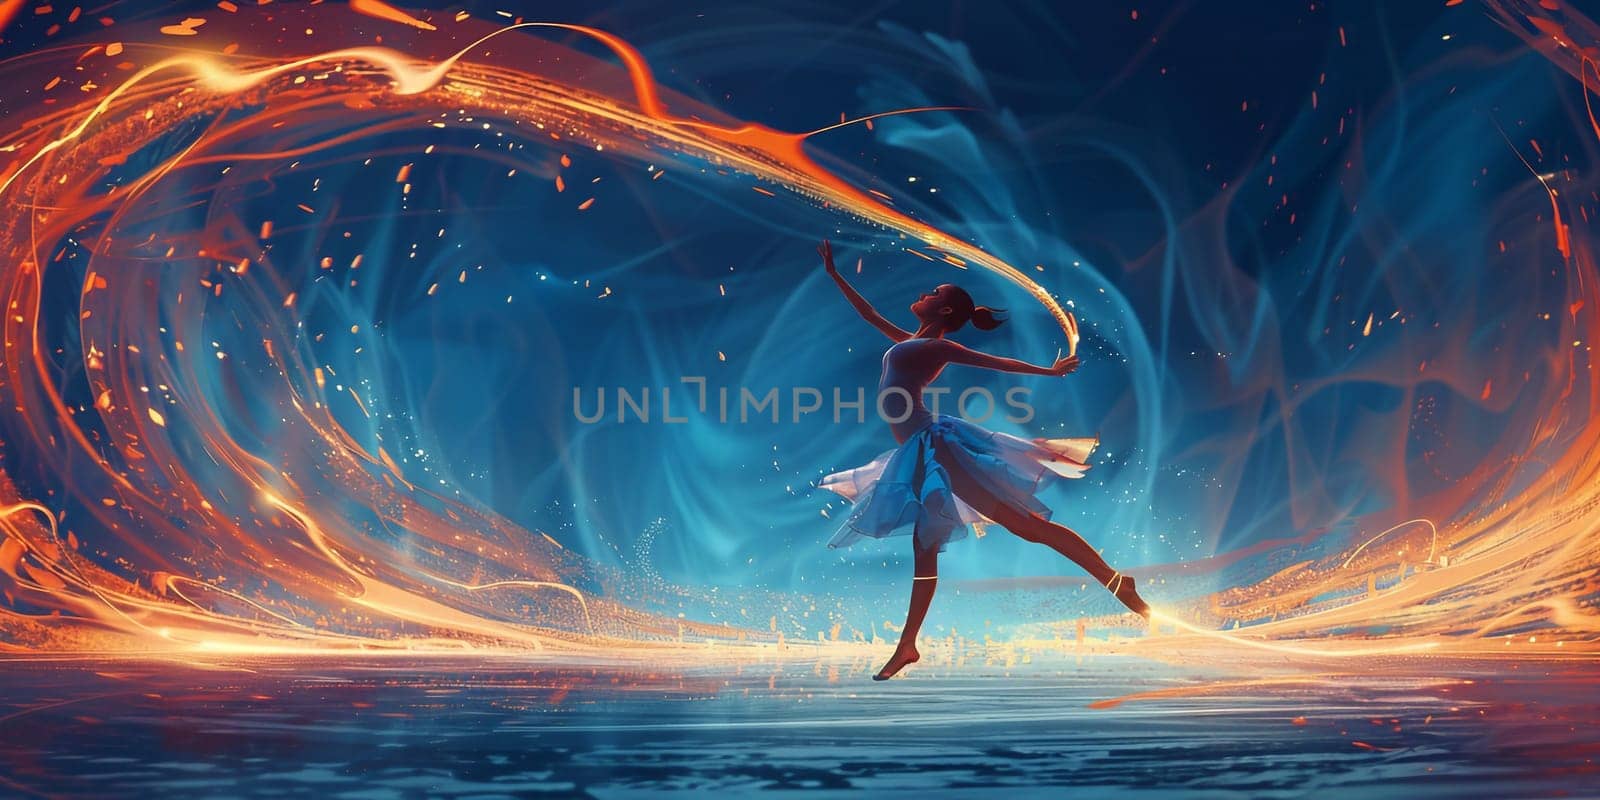 Portrait of a young ballerina on pointe shoes in a white tutu against background of bright neon lights. A young graceful ballet dancer in graceful pose. Silhouette. Ballet school poster. High quality photo